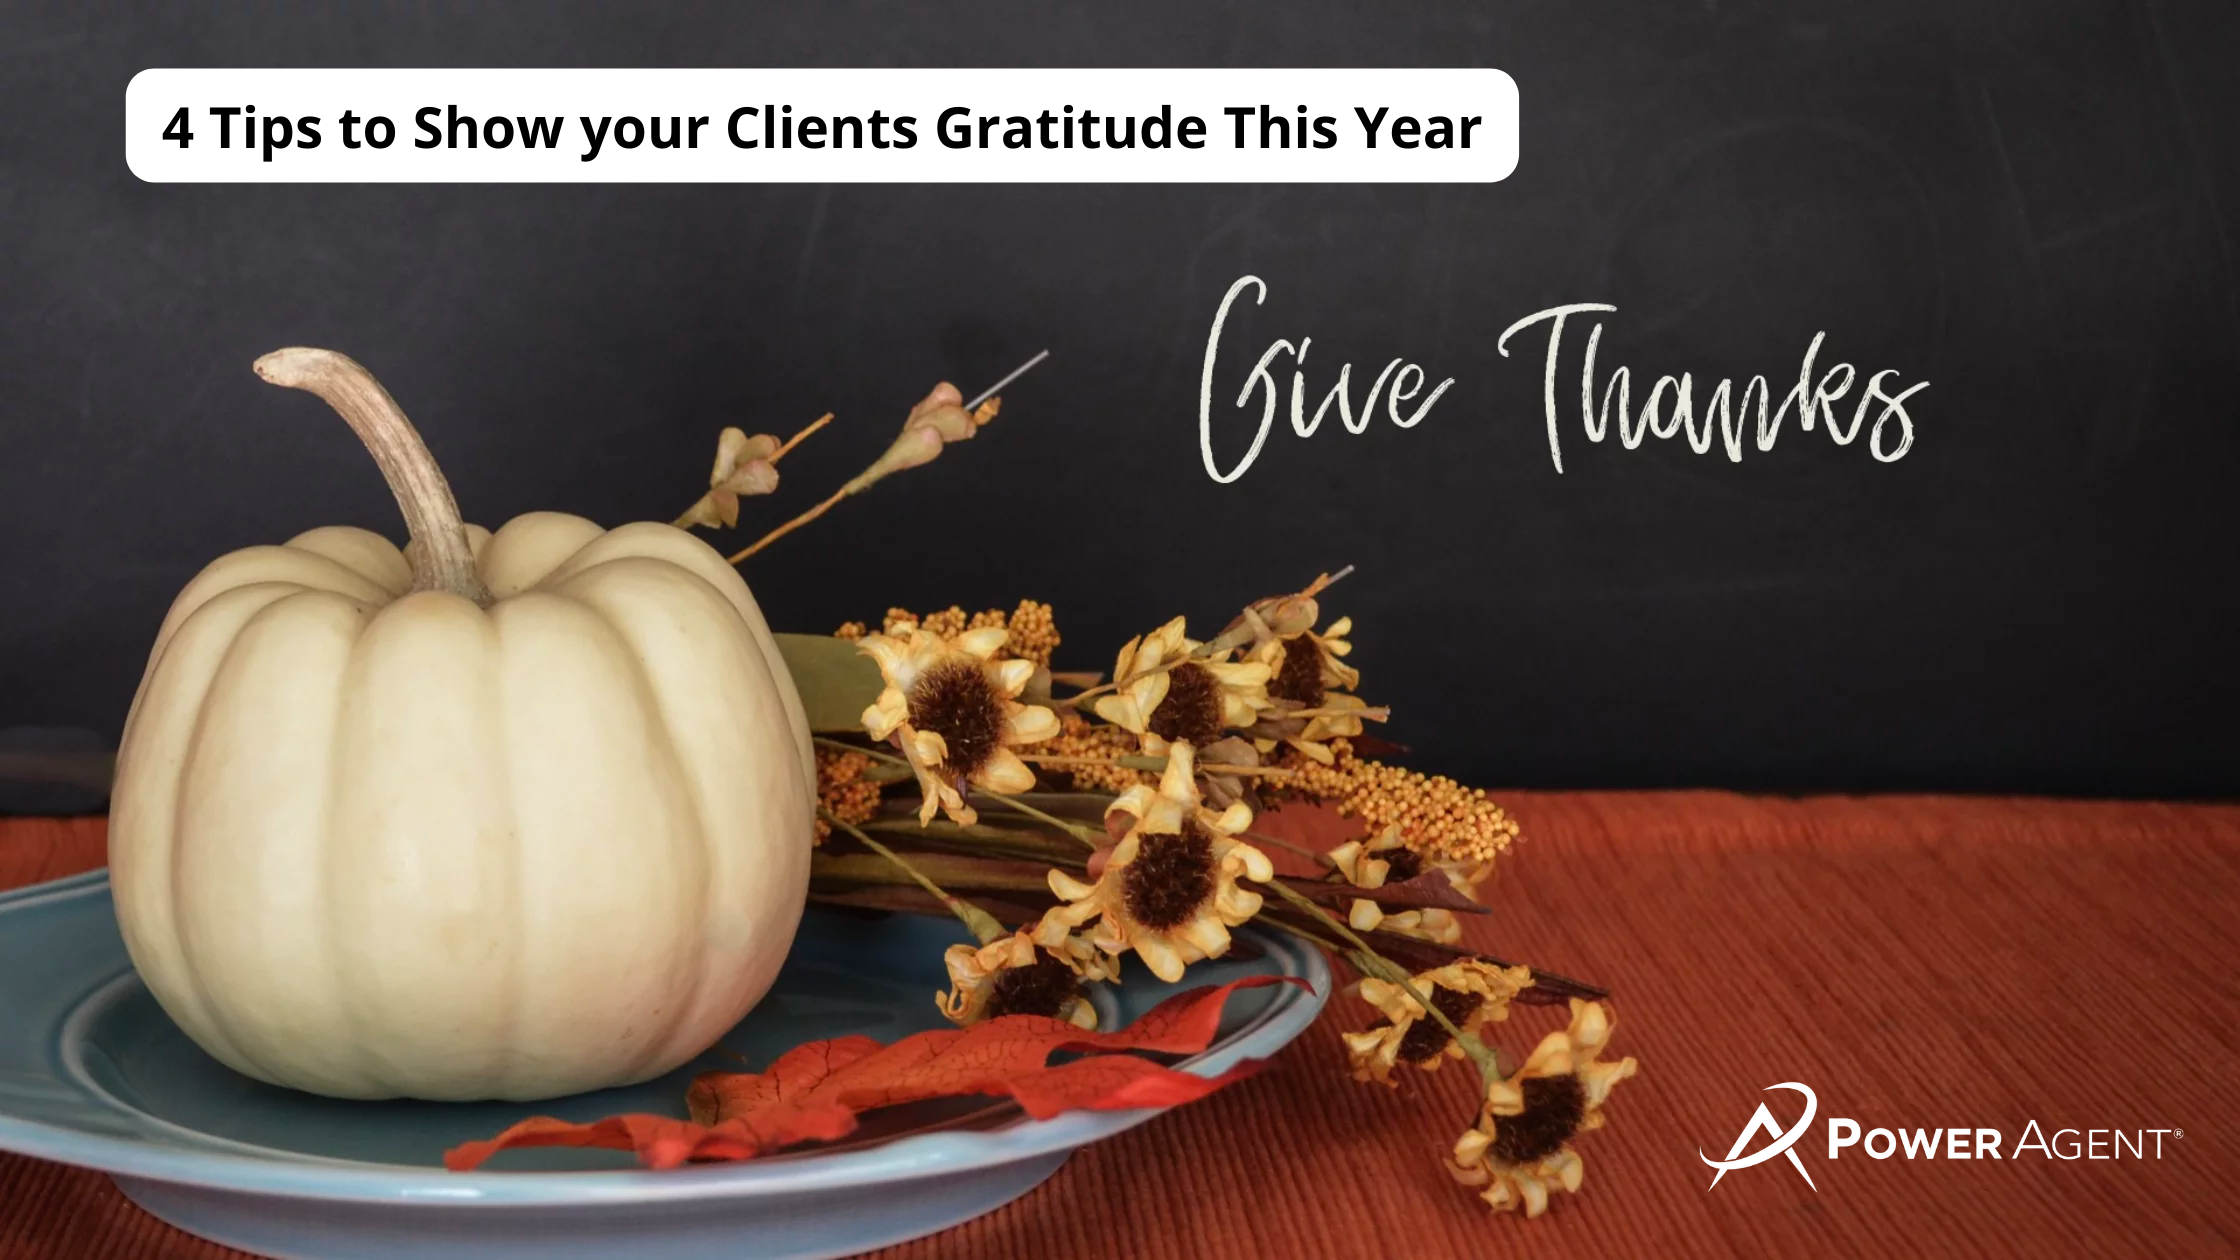 4 Tips to Show your Clients Gratitude This Year